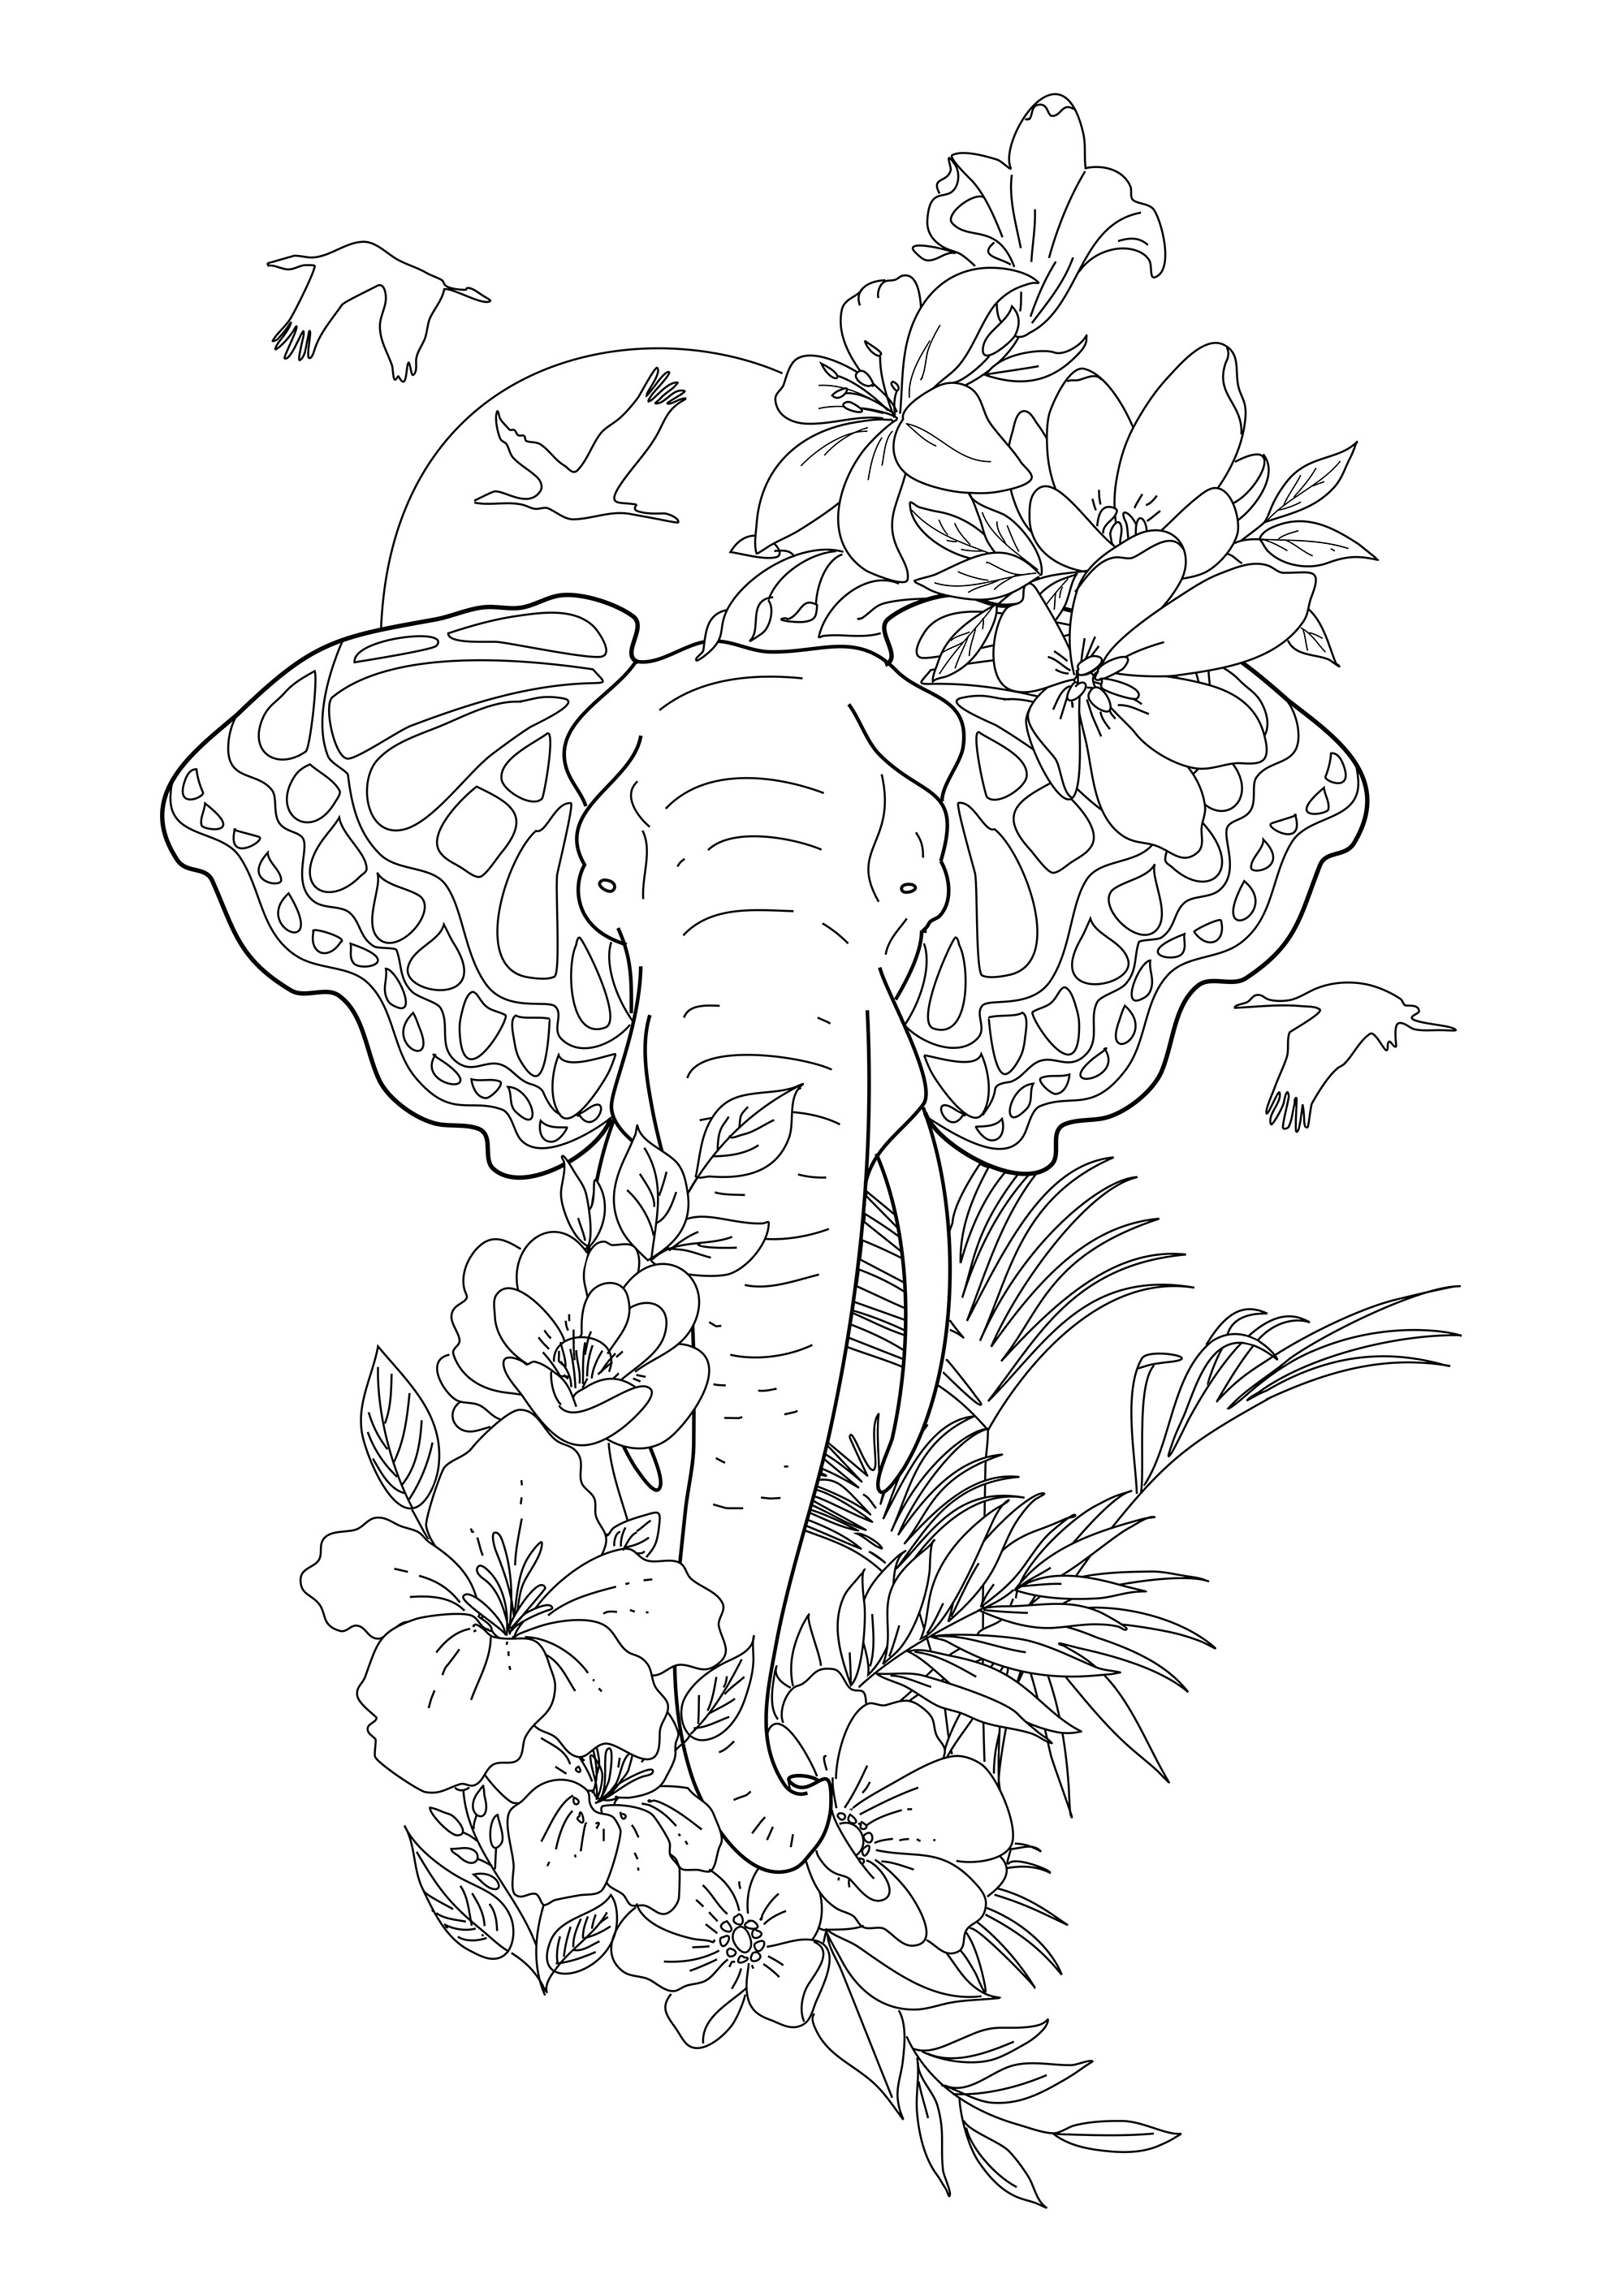 Elephant and Butterfly, with flowers and birds.This illustration represents duality and balance in nature.  The elephant is a symbol of stability, heaviness, and reality, while the butterfly (whose wings shape the elephant's ears) is a symbol of transformation, lightness, and imagination.  From the book “Realistic Tattoos Coloring Book” by Italian tattoo artist and author, Roberto “GiErre” Gemori  Product page: coloringbook.pictures/index.html  Author's website: Tattootribes.com